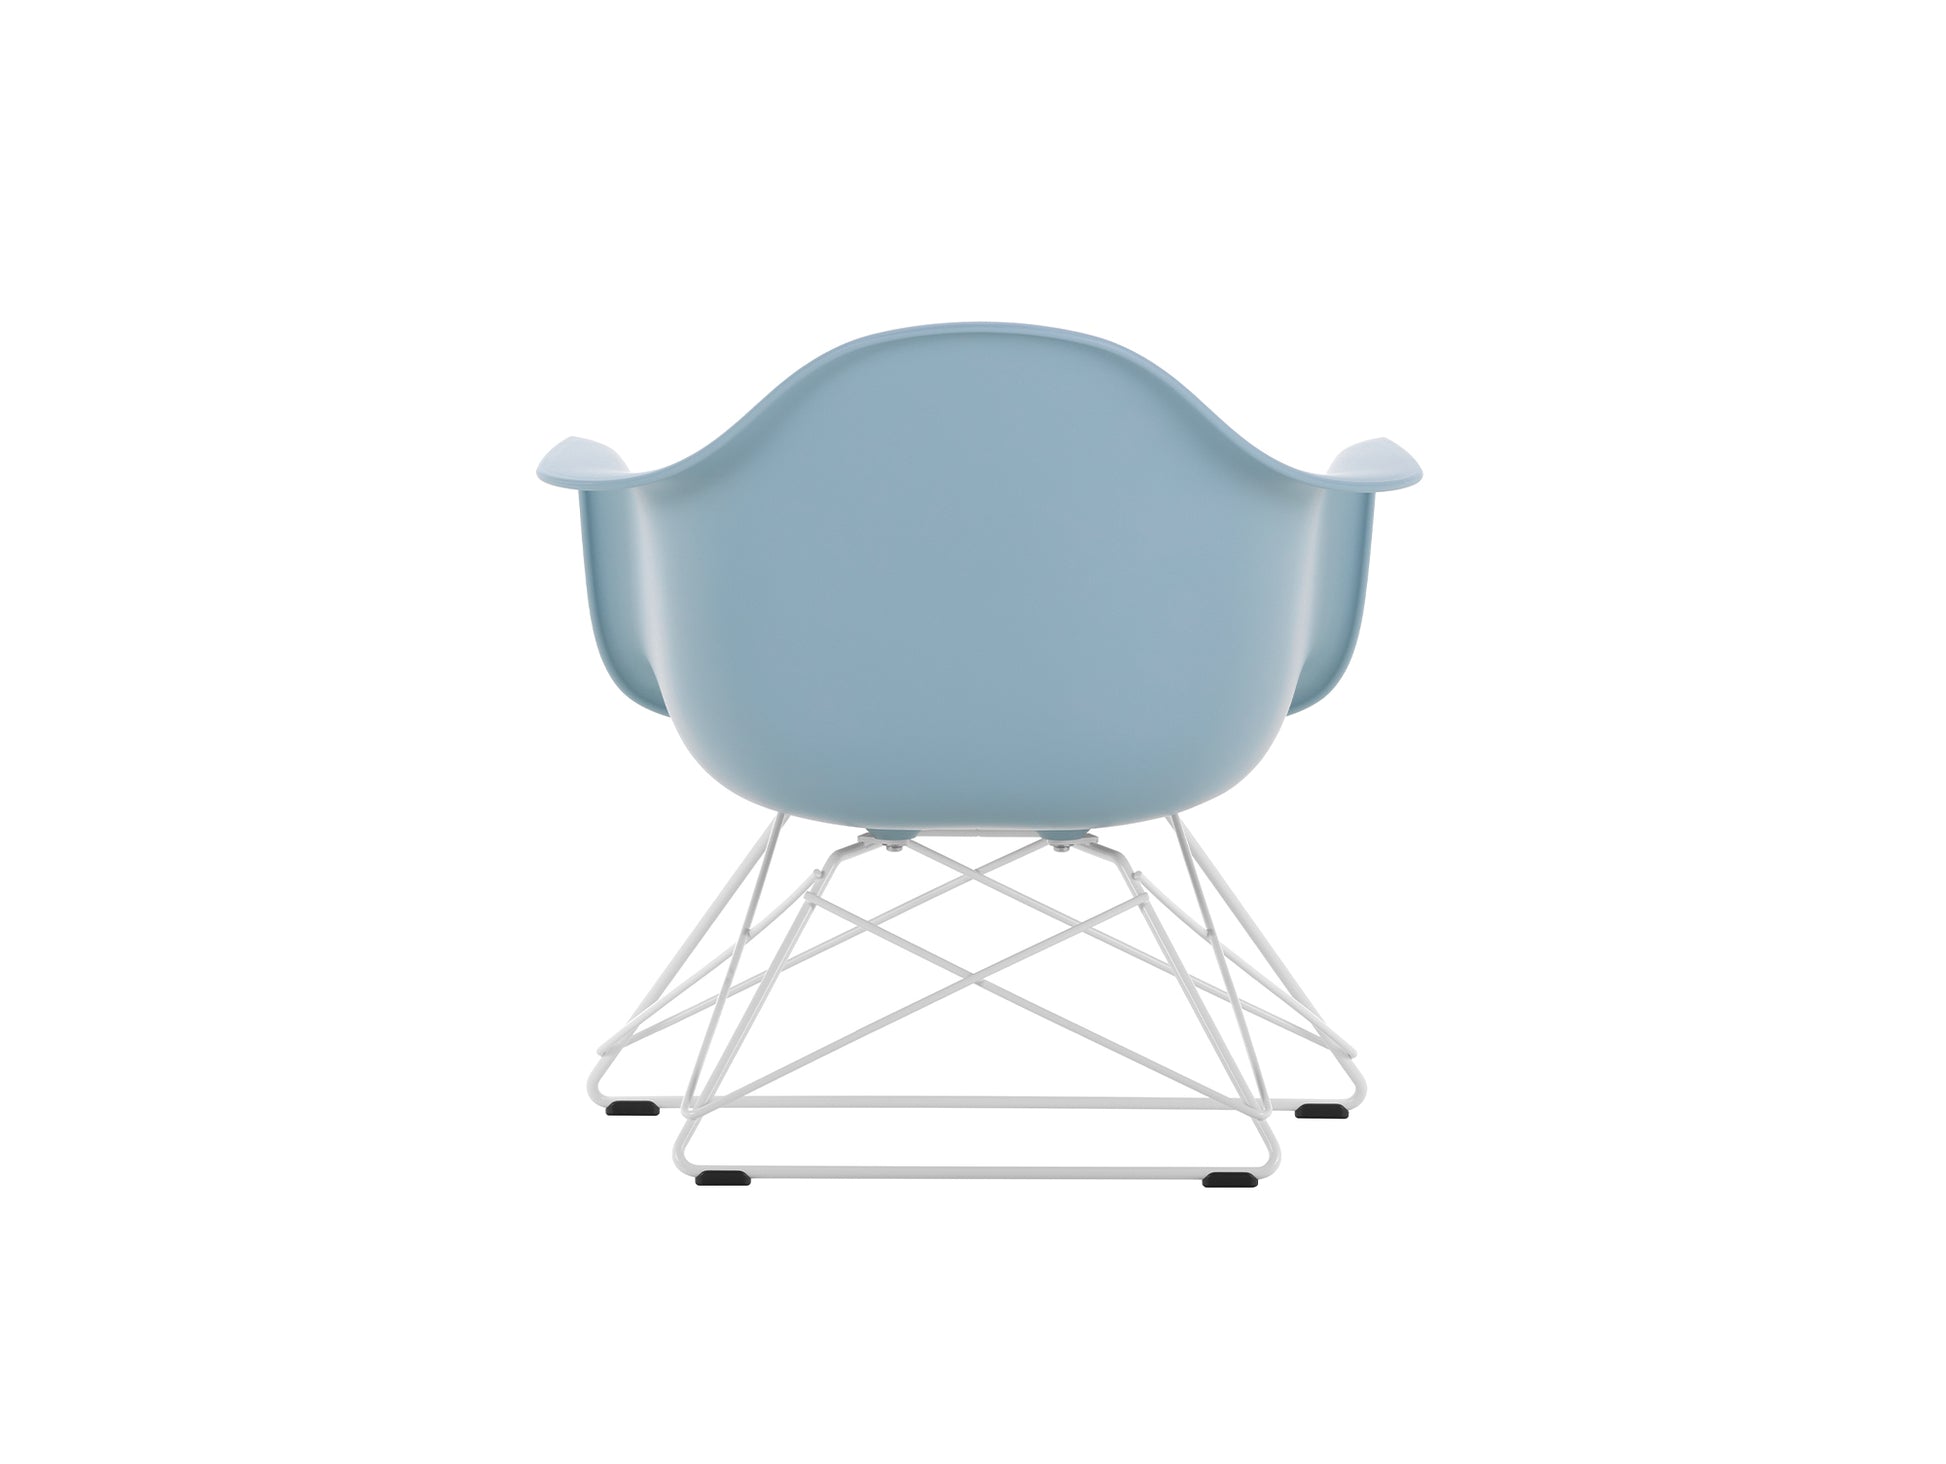 Eames Plastic Armchair LAR by Vitra - Ice Grey 23 Shell / White Powder-Coated Steel